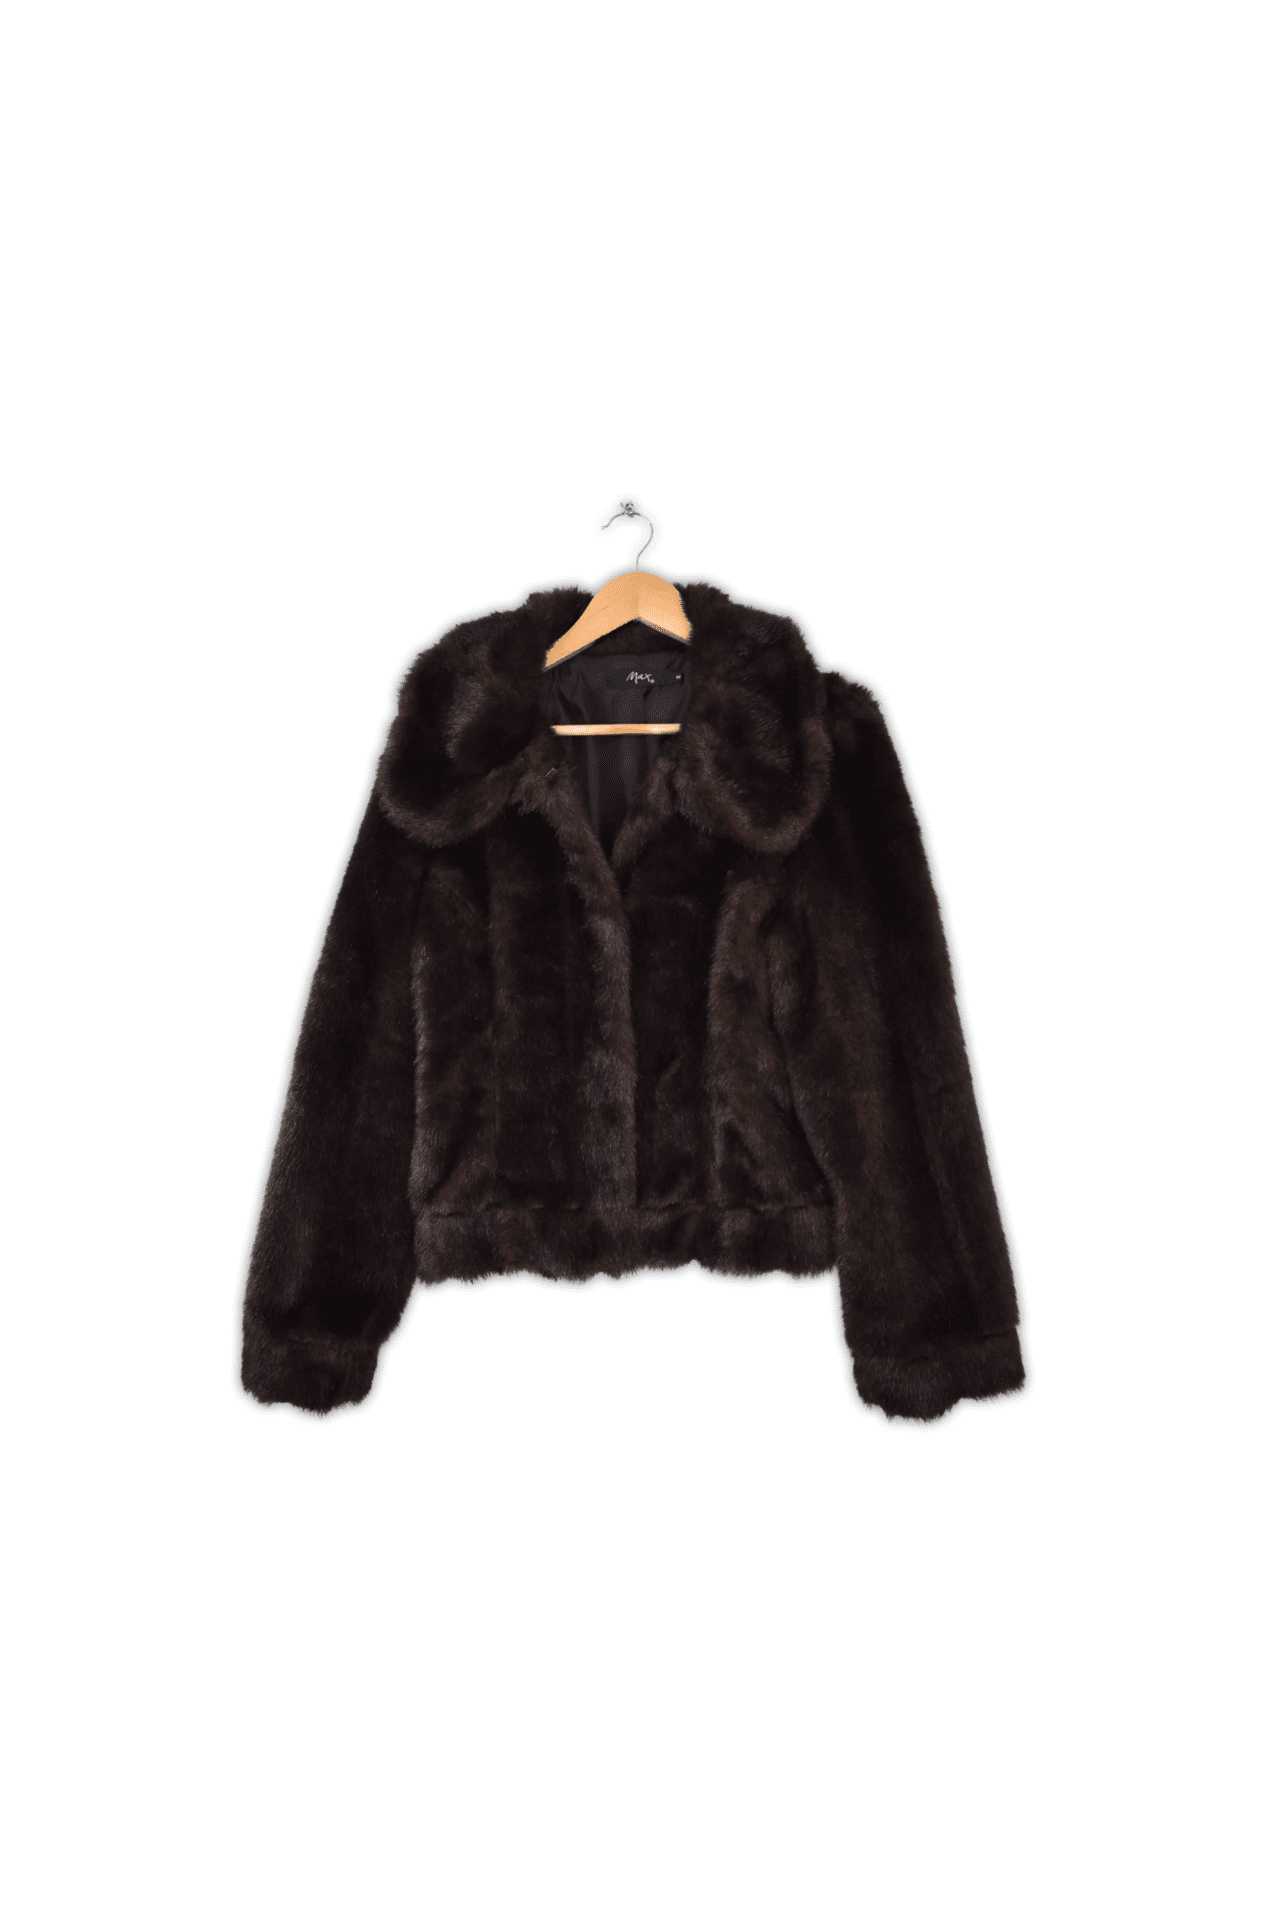 Soft and luxurious brown faux fur jacket